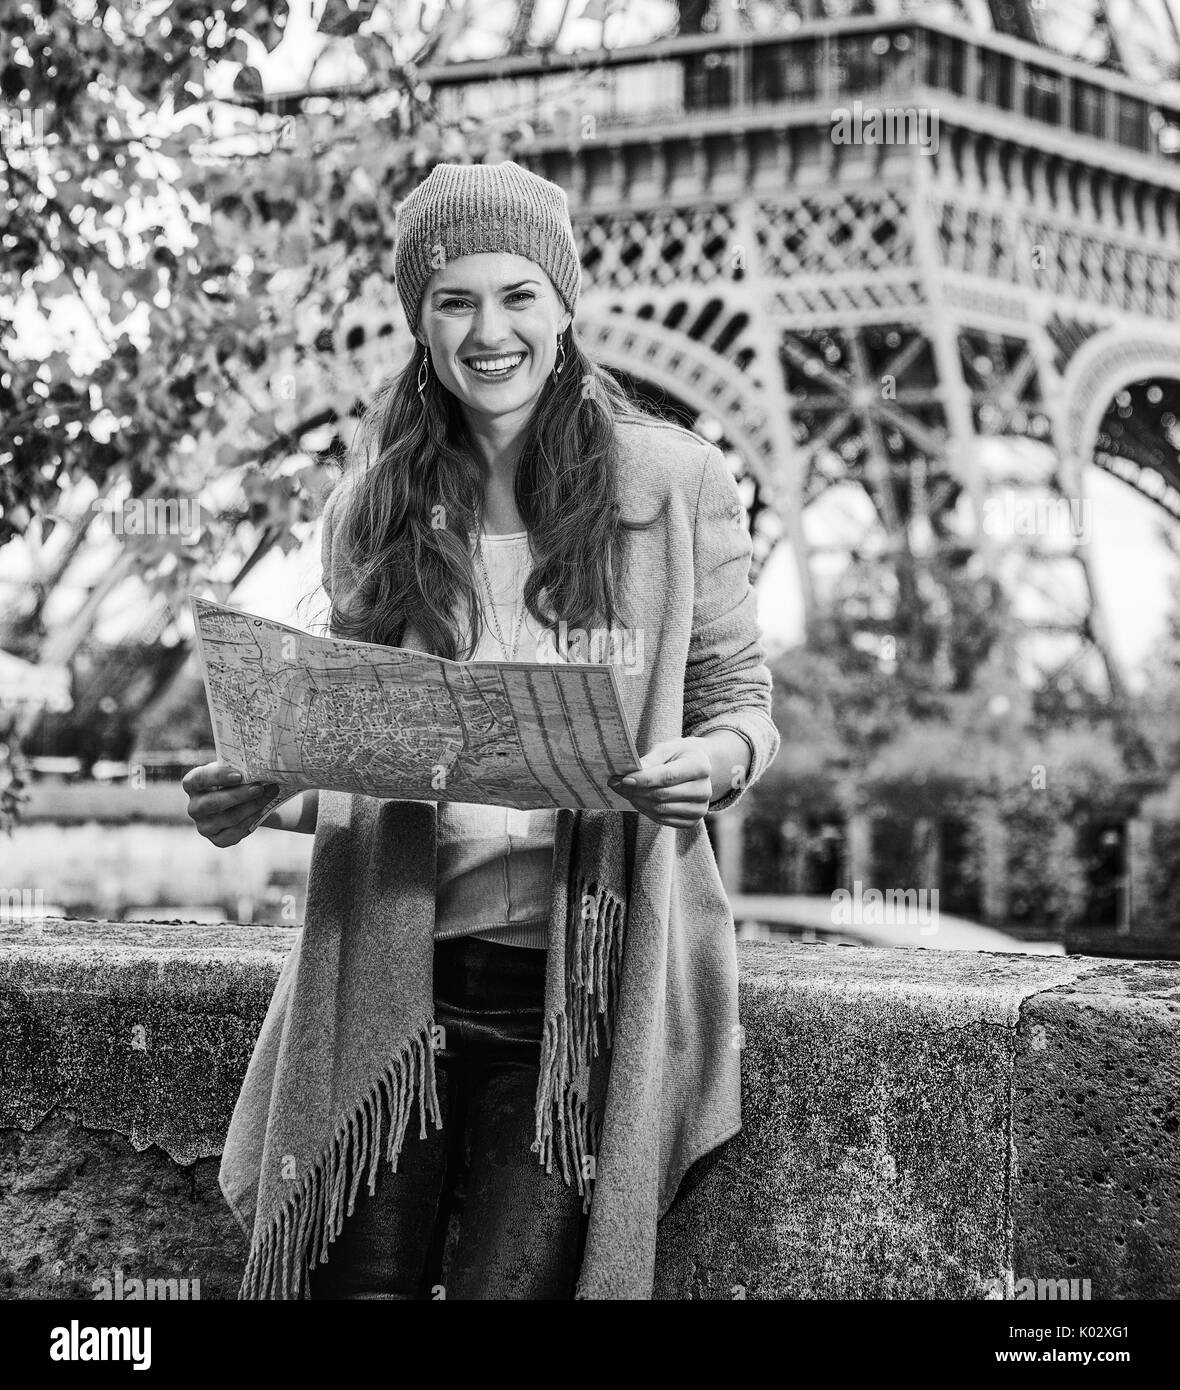 Autumn getaways in Paris. Portrait of smiling young tourist woman on embankment near Eiffel tower in Paris, France with map Stock Photo